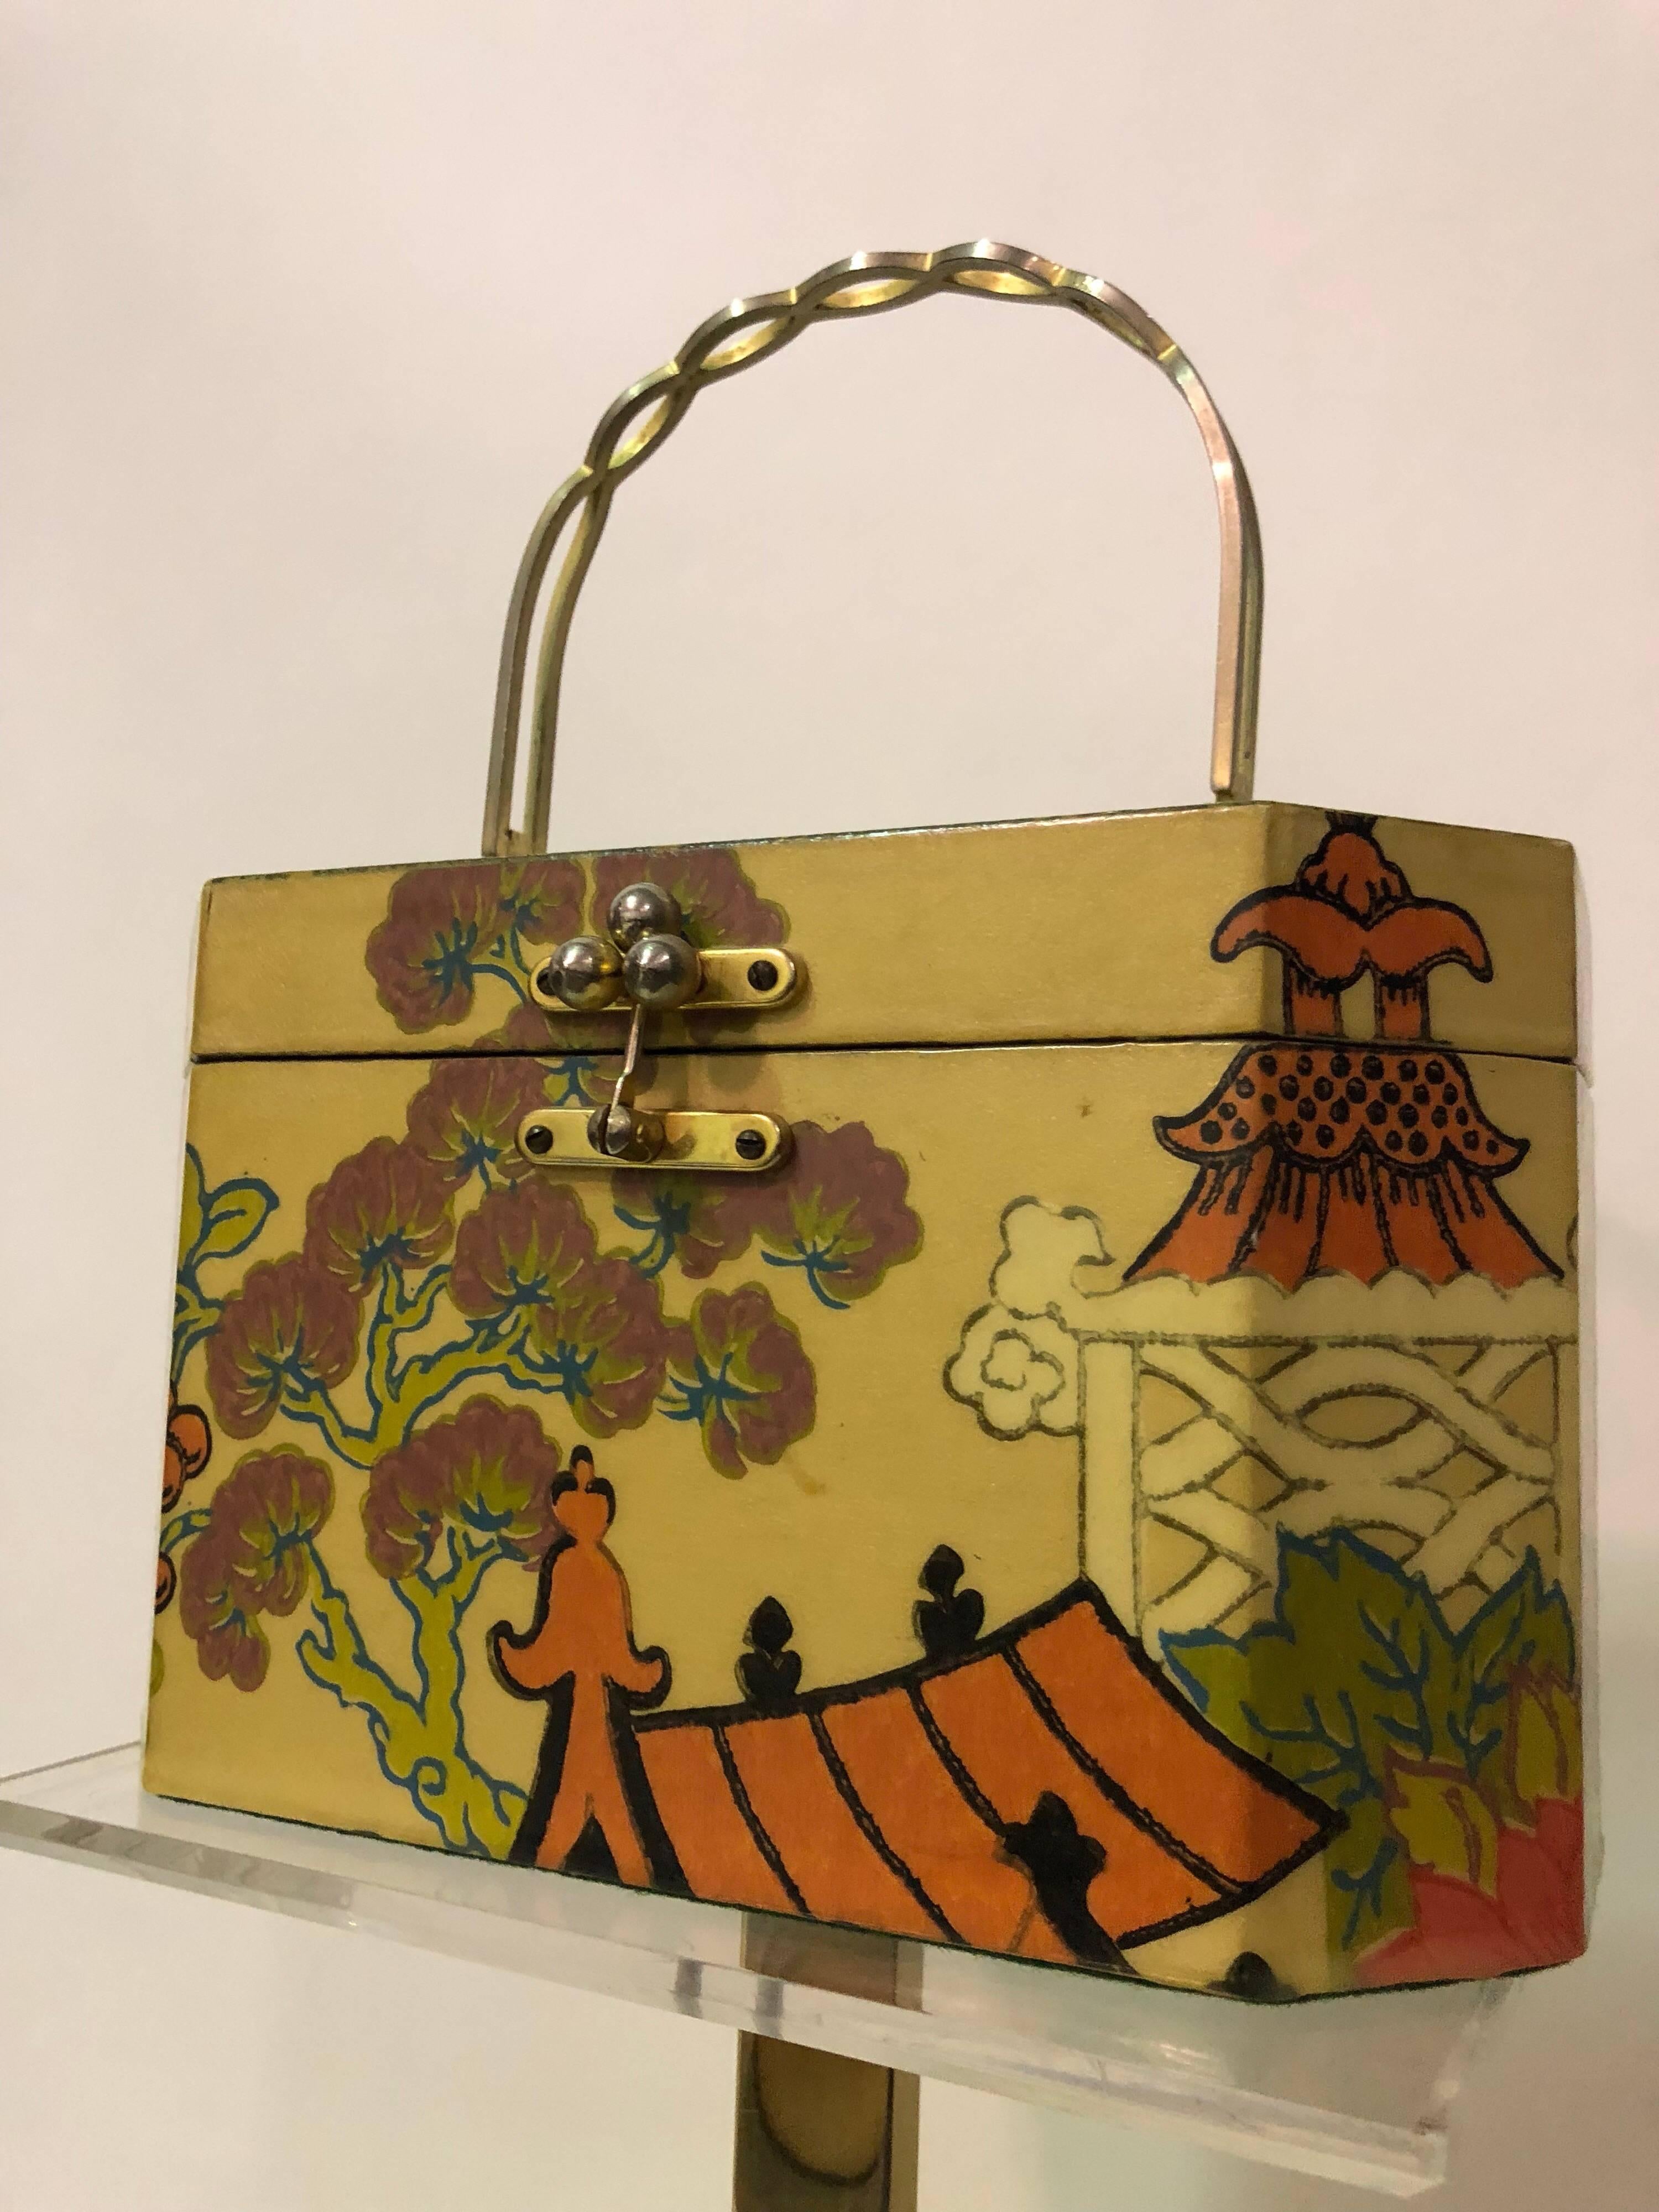 1960s Annie Laurie Originals - Palm Beach octagonal box bag with hinged lid and metal arched handle. Inside is quilted green fabric and outside is covered in a stylized Chinese motif with pagoda and figures. 